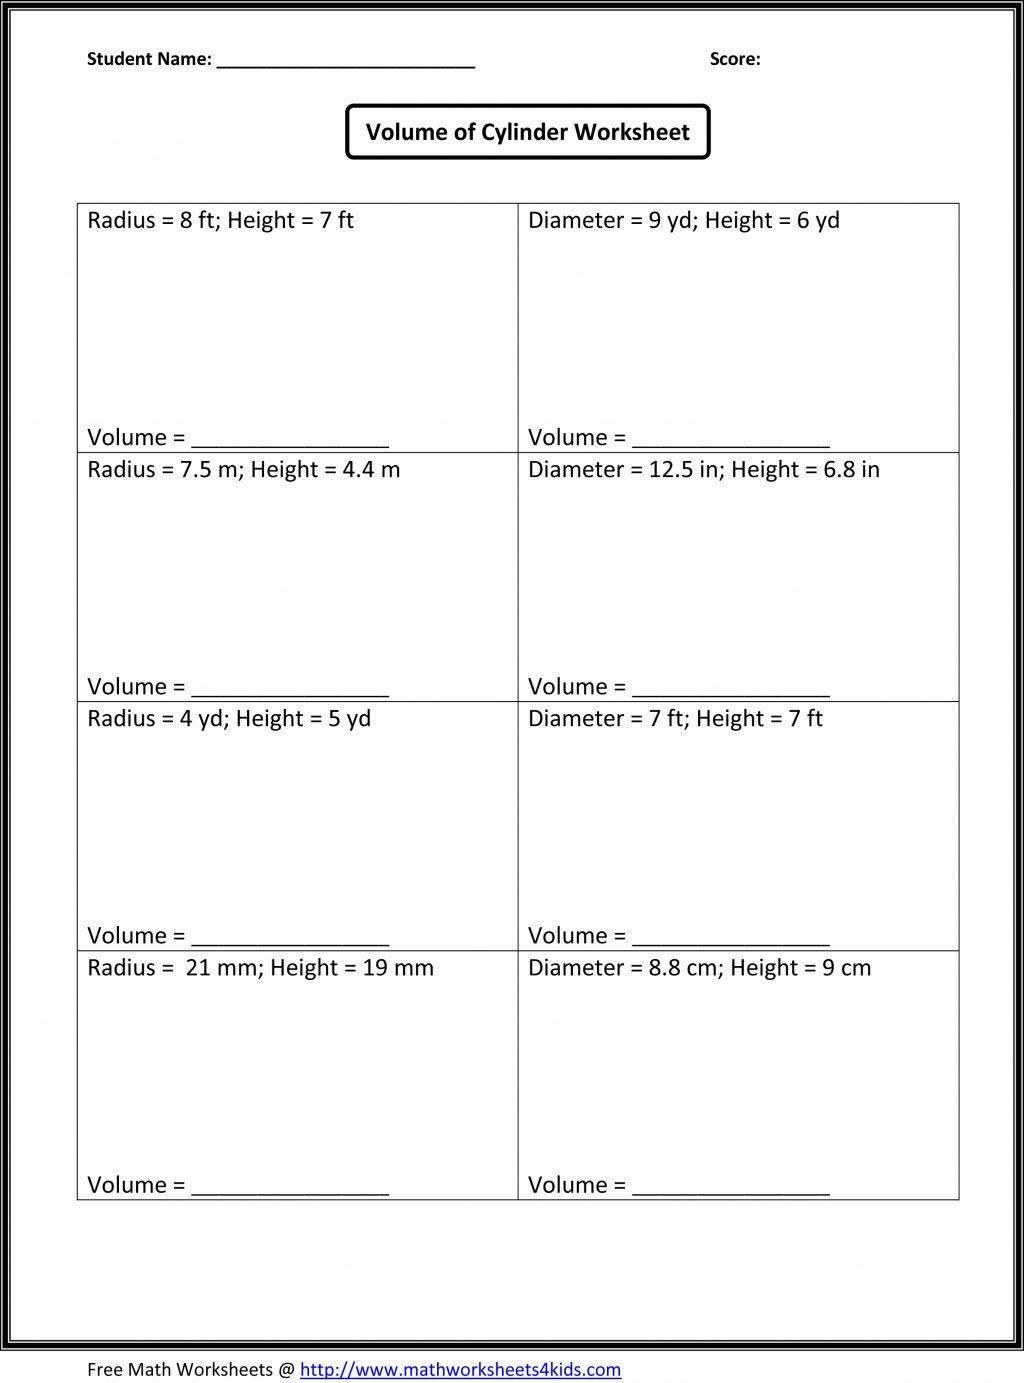 032-14-common-core-math-worksheets-4th-grade-word-problems-5-db-excel